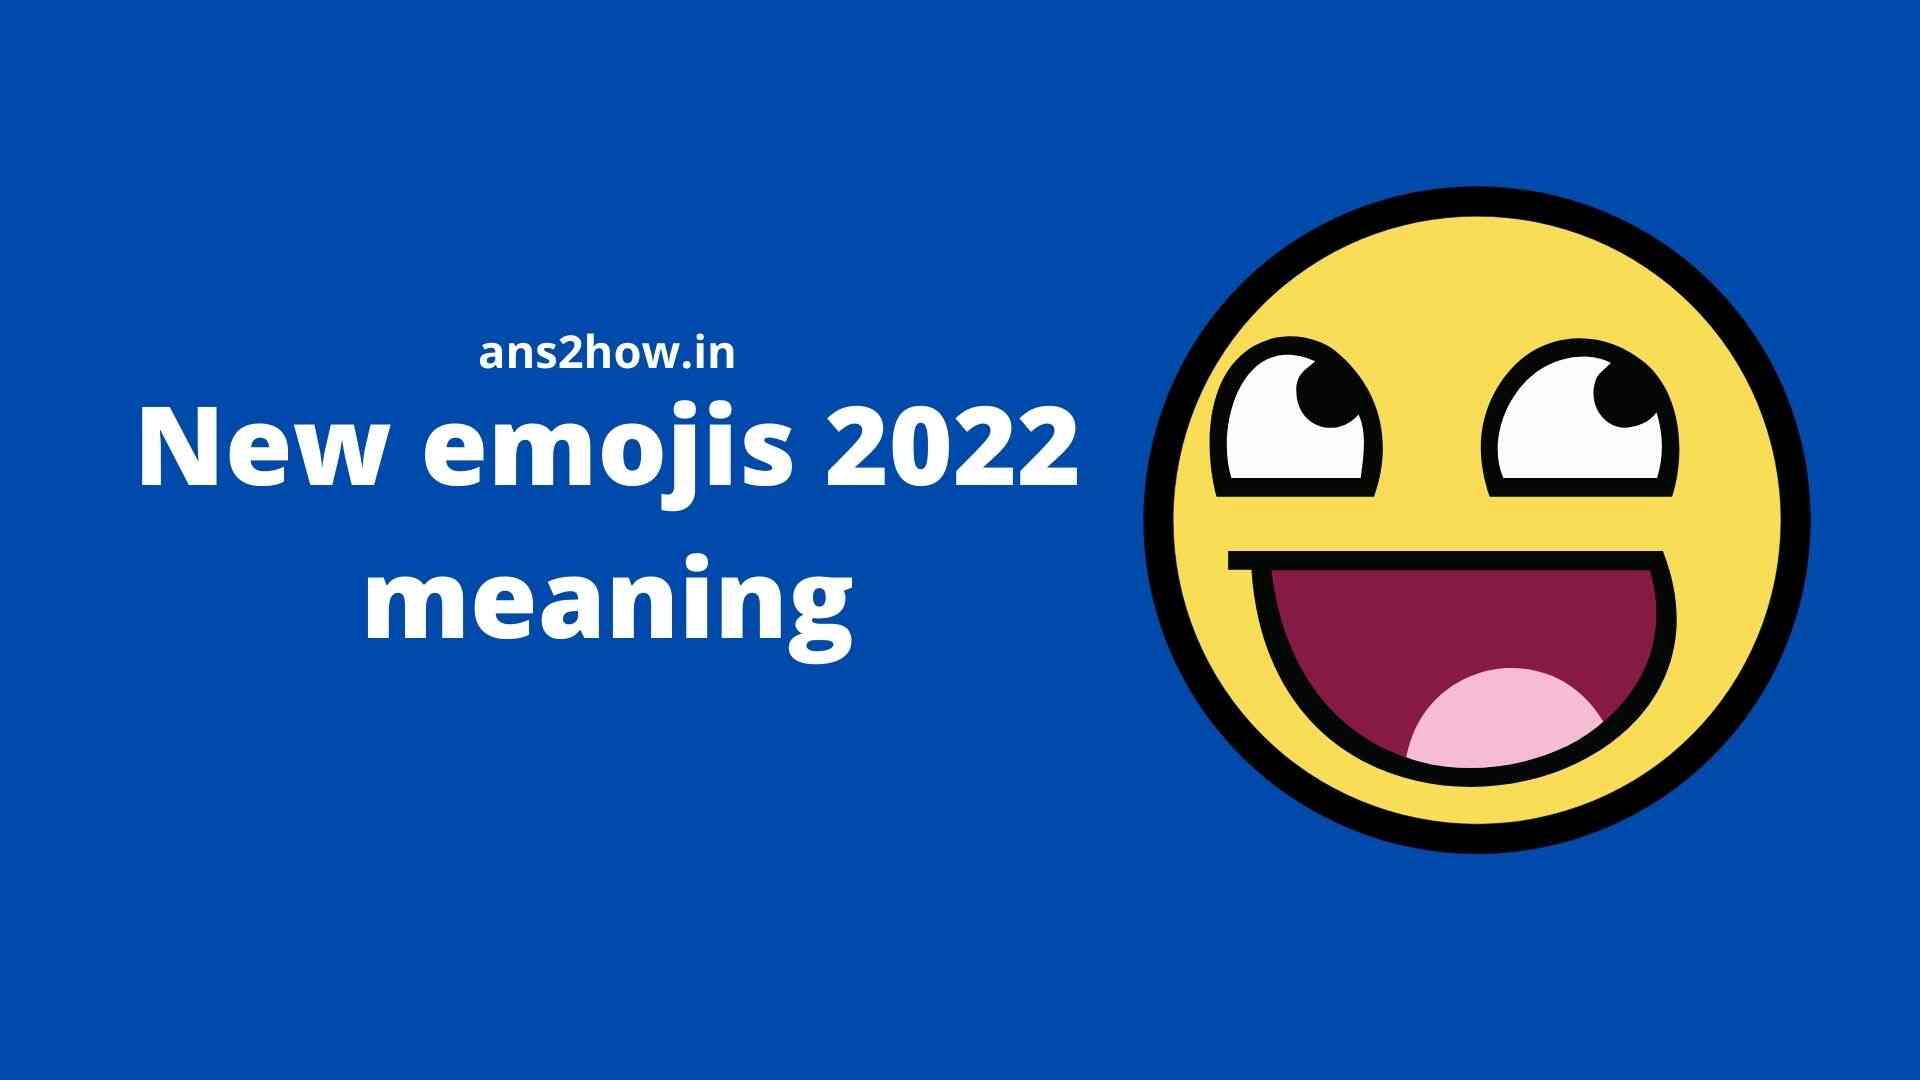 New emojis 2022 meaning